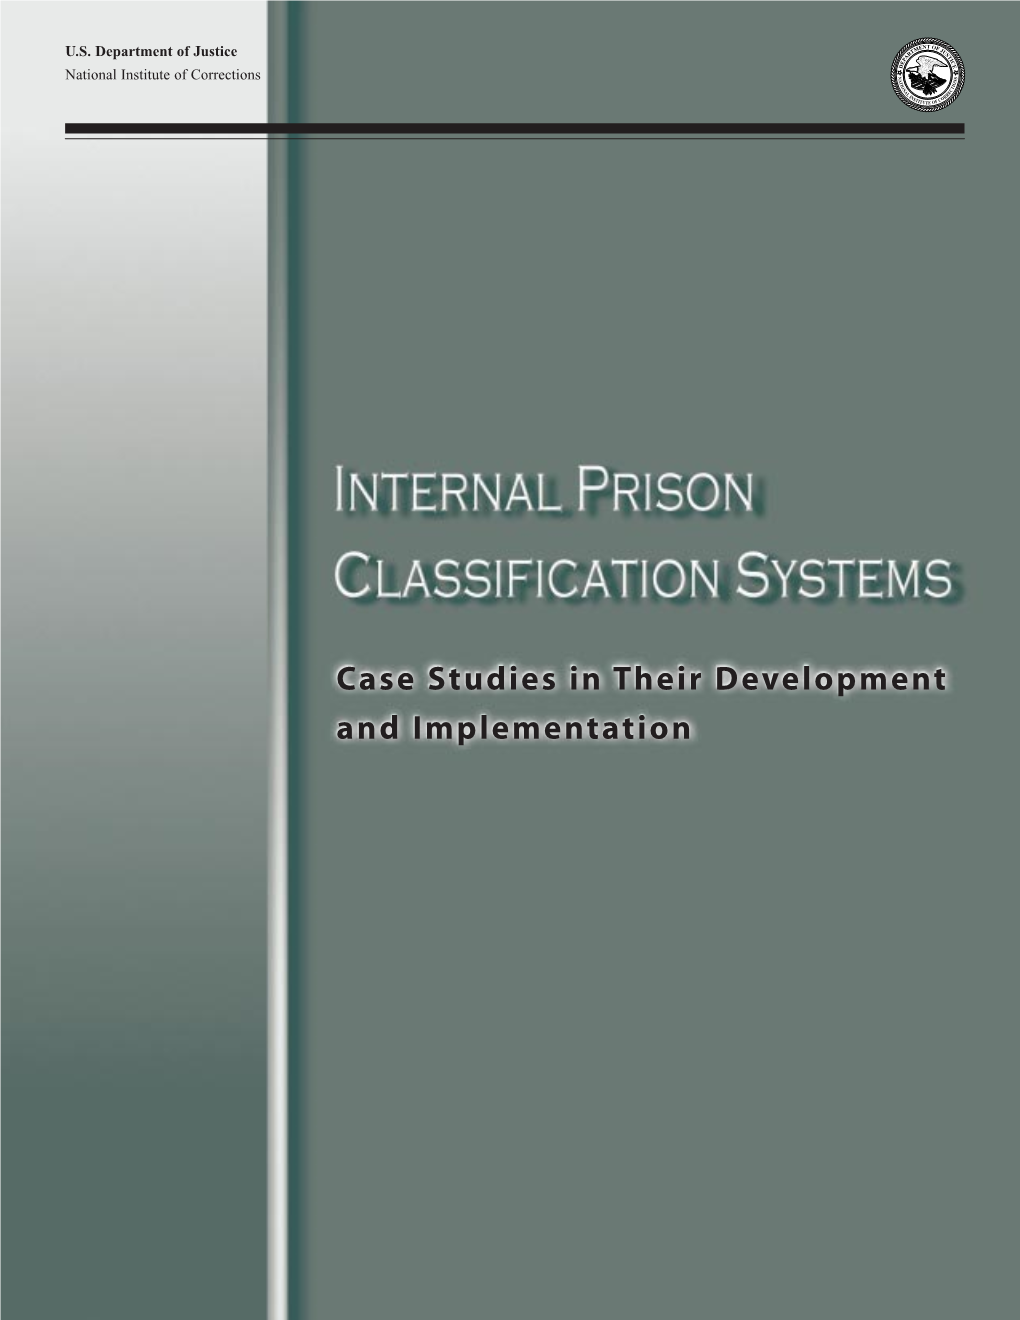 Internal Prison Classification Systems: Case Studies in Their Development and Implementation